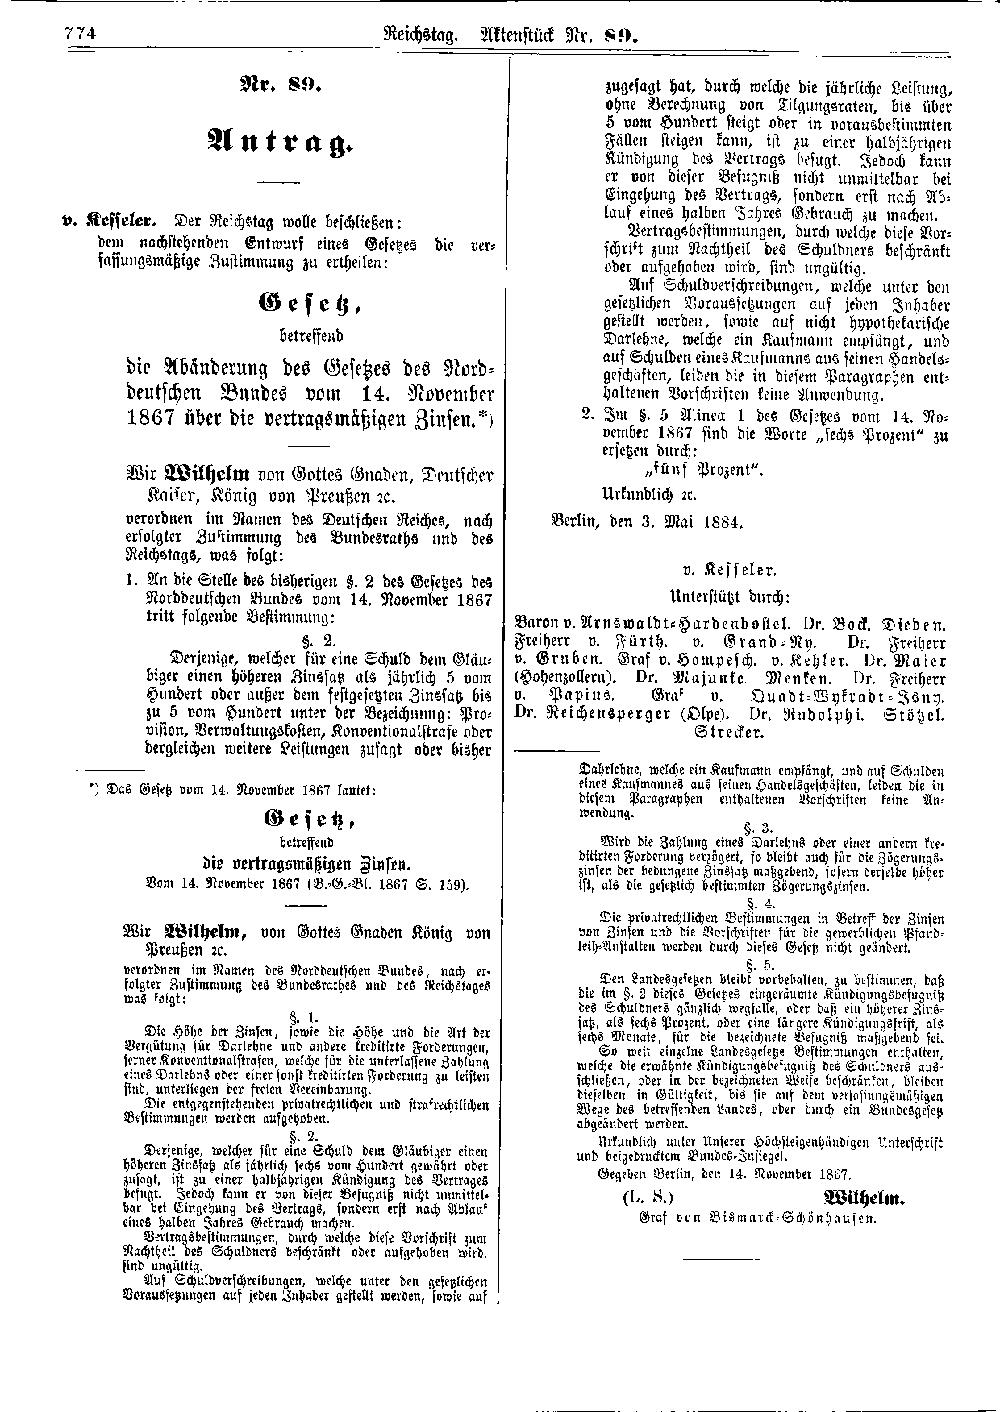 Scan of page 774